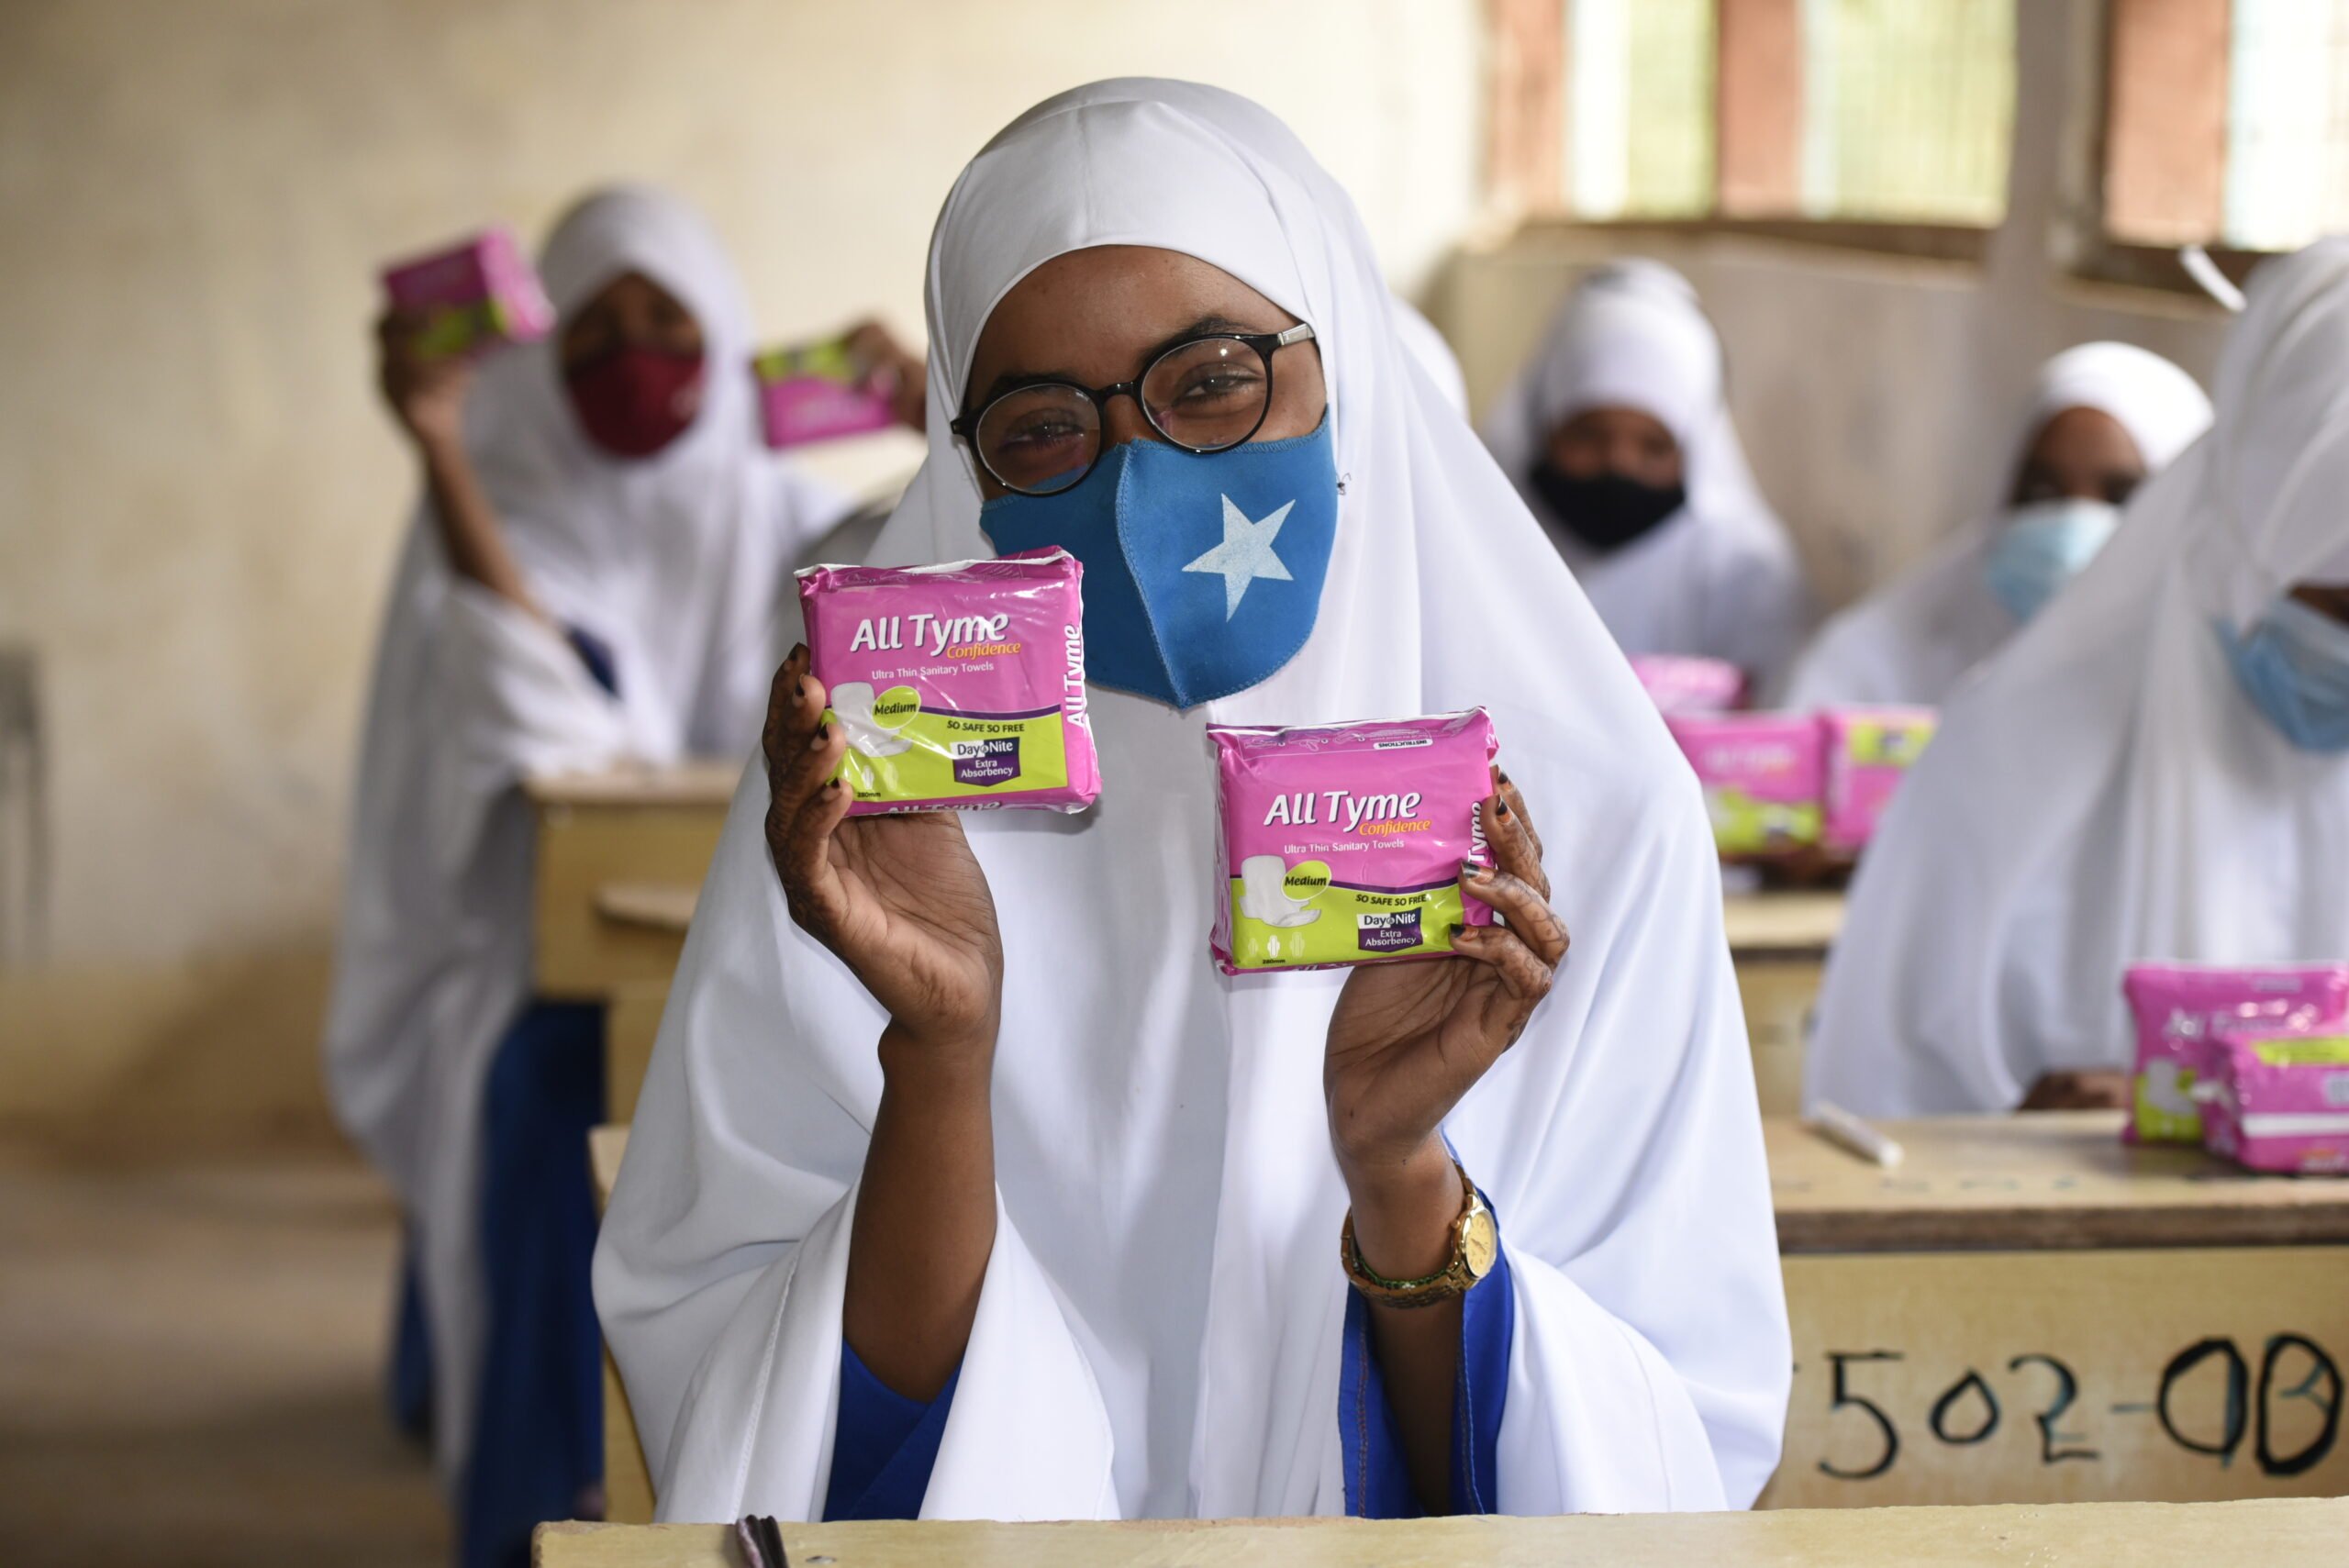 U.S. donates sanitary pads to support education of refugee girls in Dadaab  – UNHCR Kenya